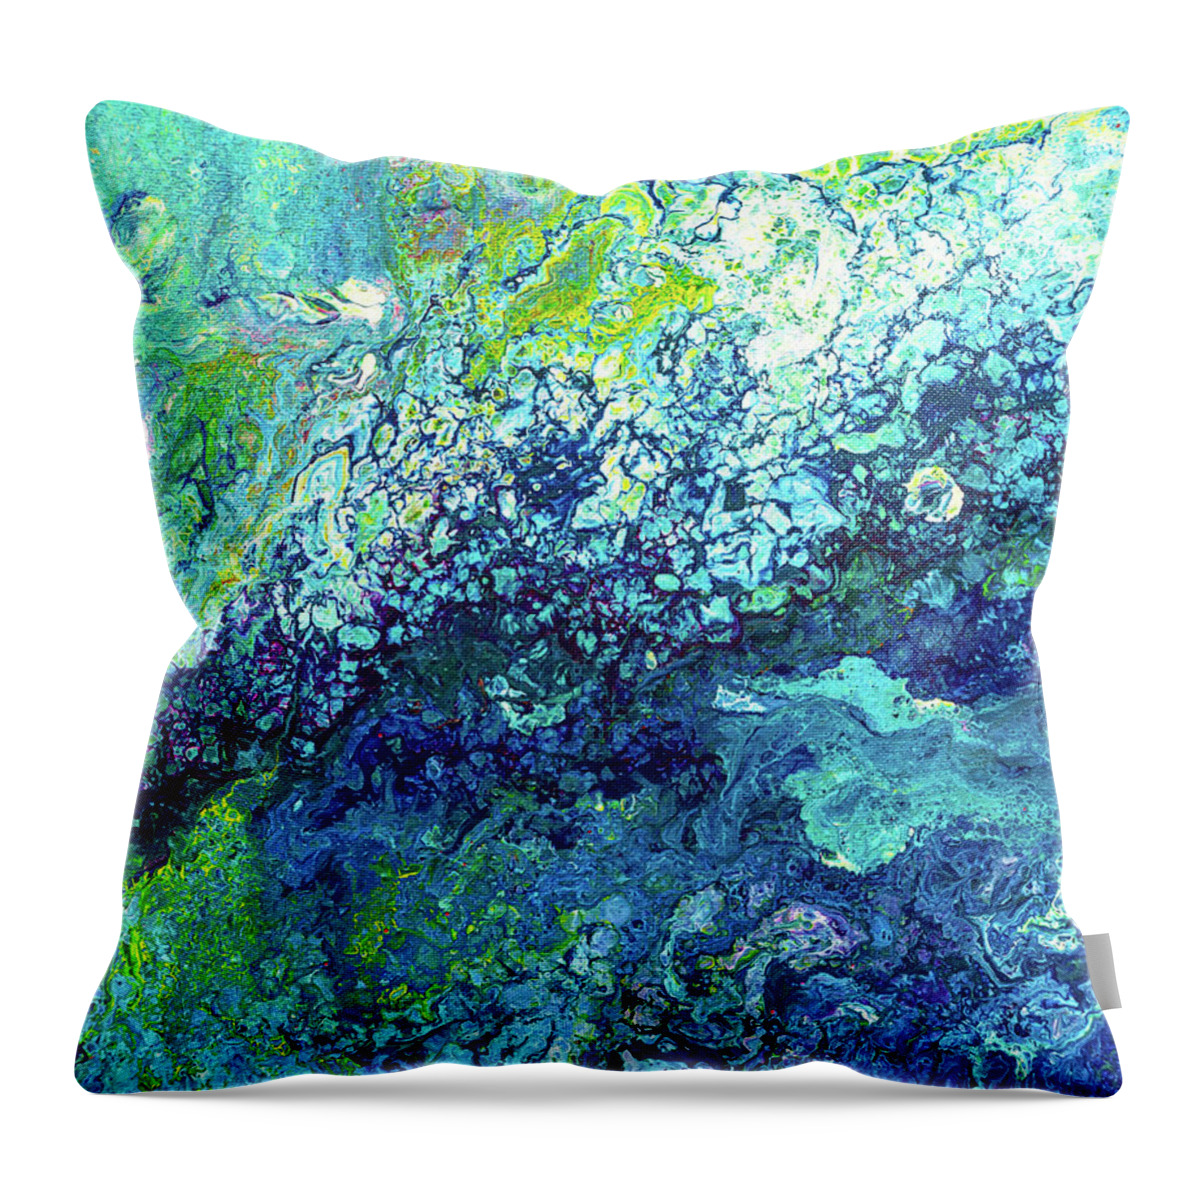 Turquoise Throw Pillow featuring the painting Turquoise Flow by Maria Meester